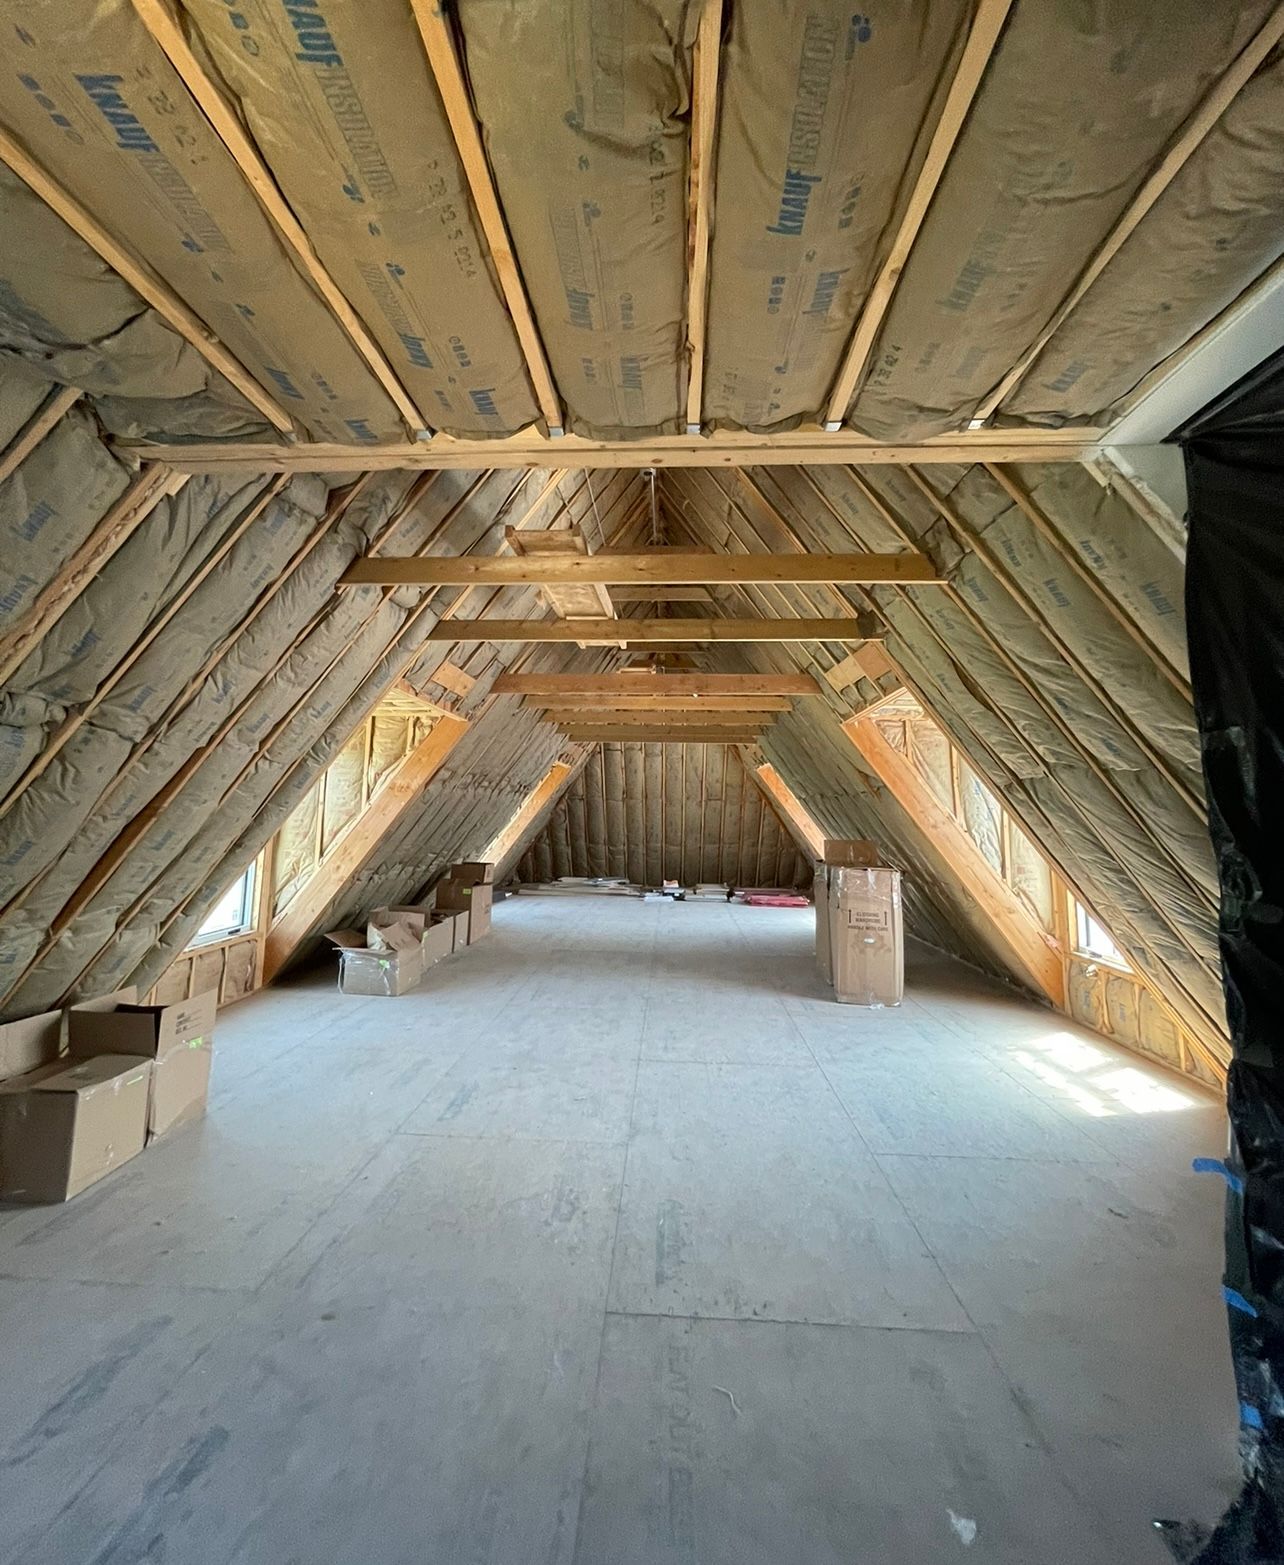 Insulation installed in an unfinished attic.